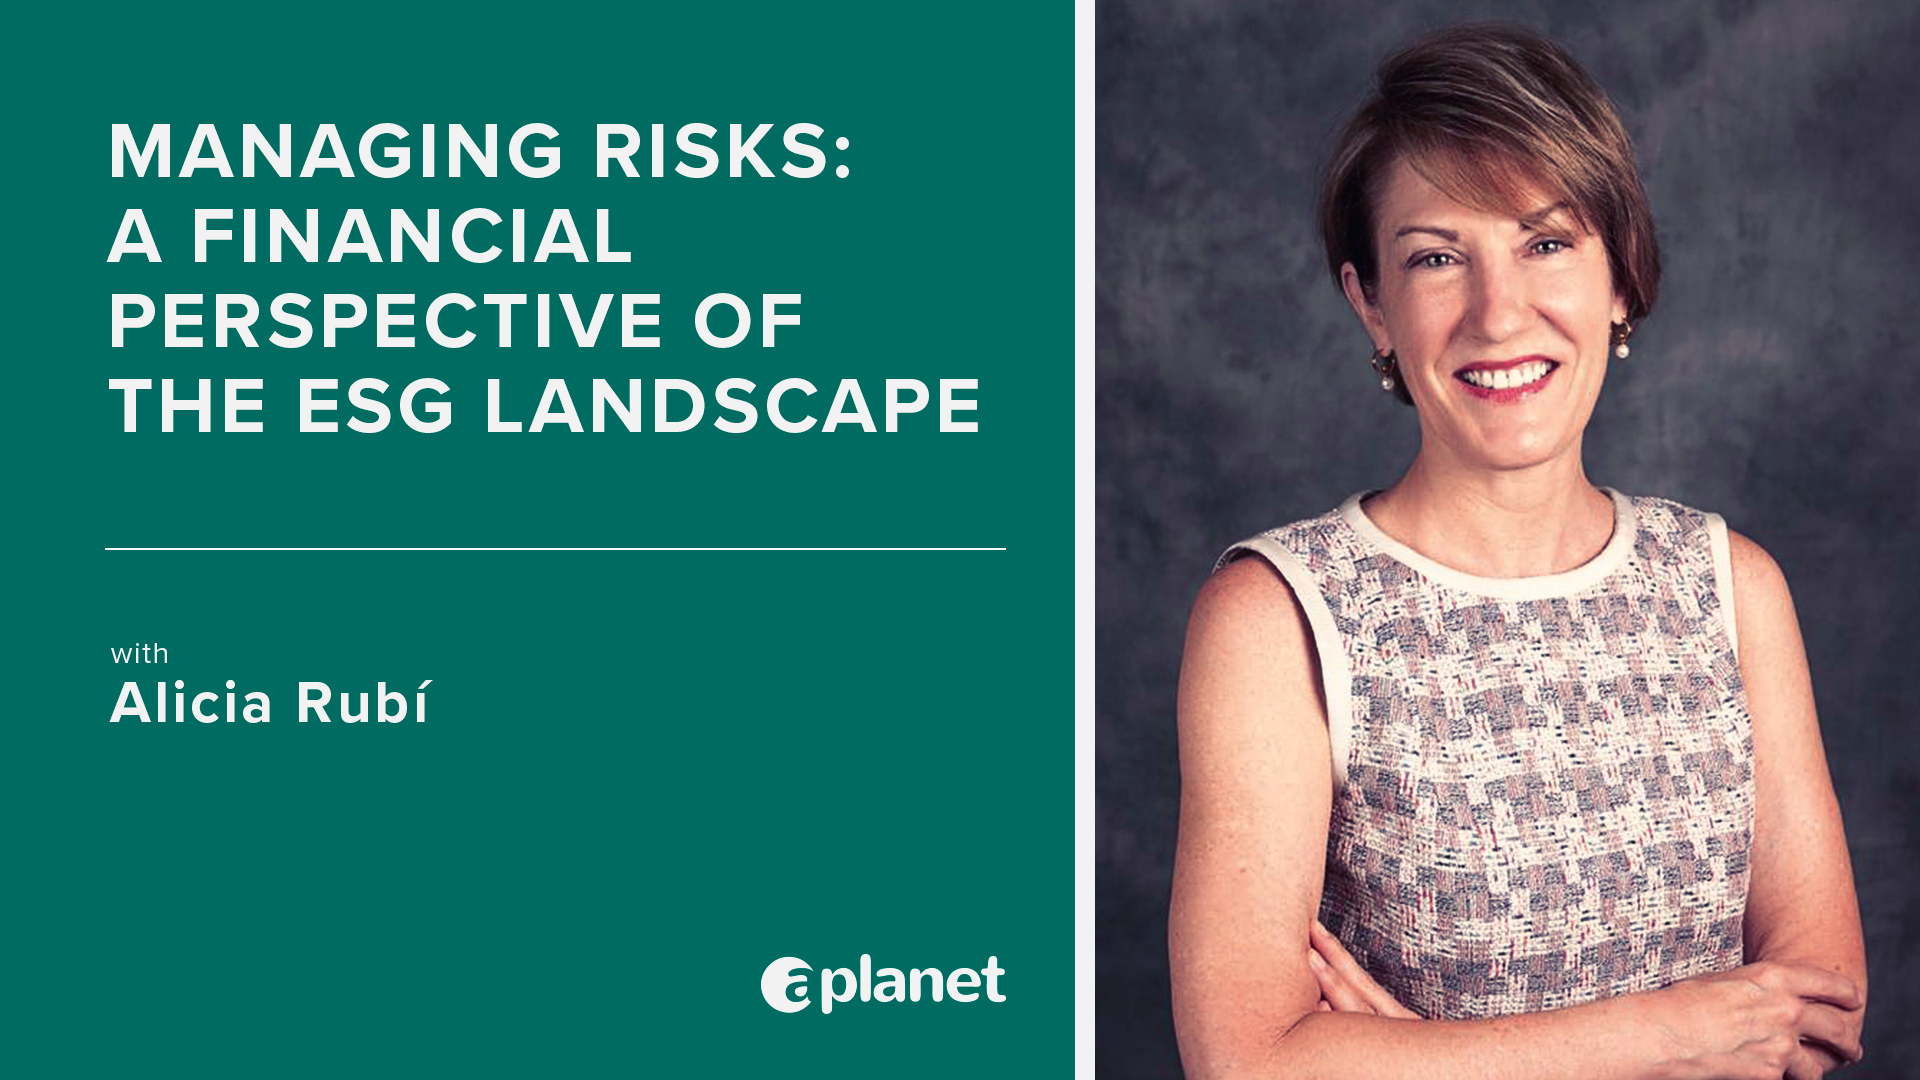 managing risks: a financial perspective of the ESG landscape